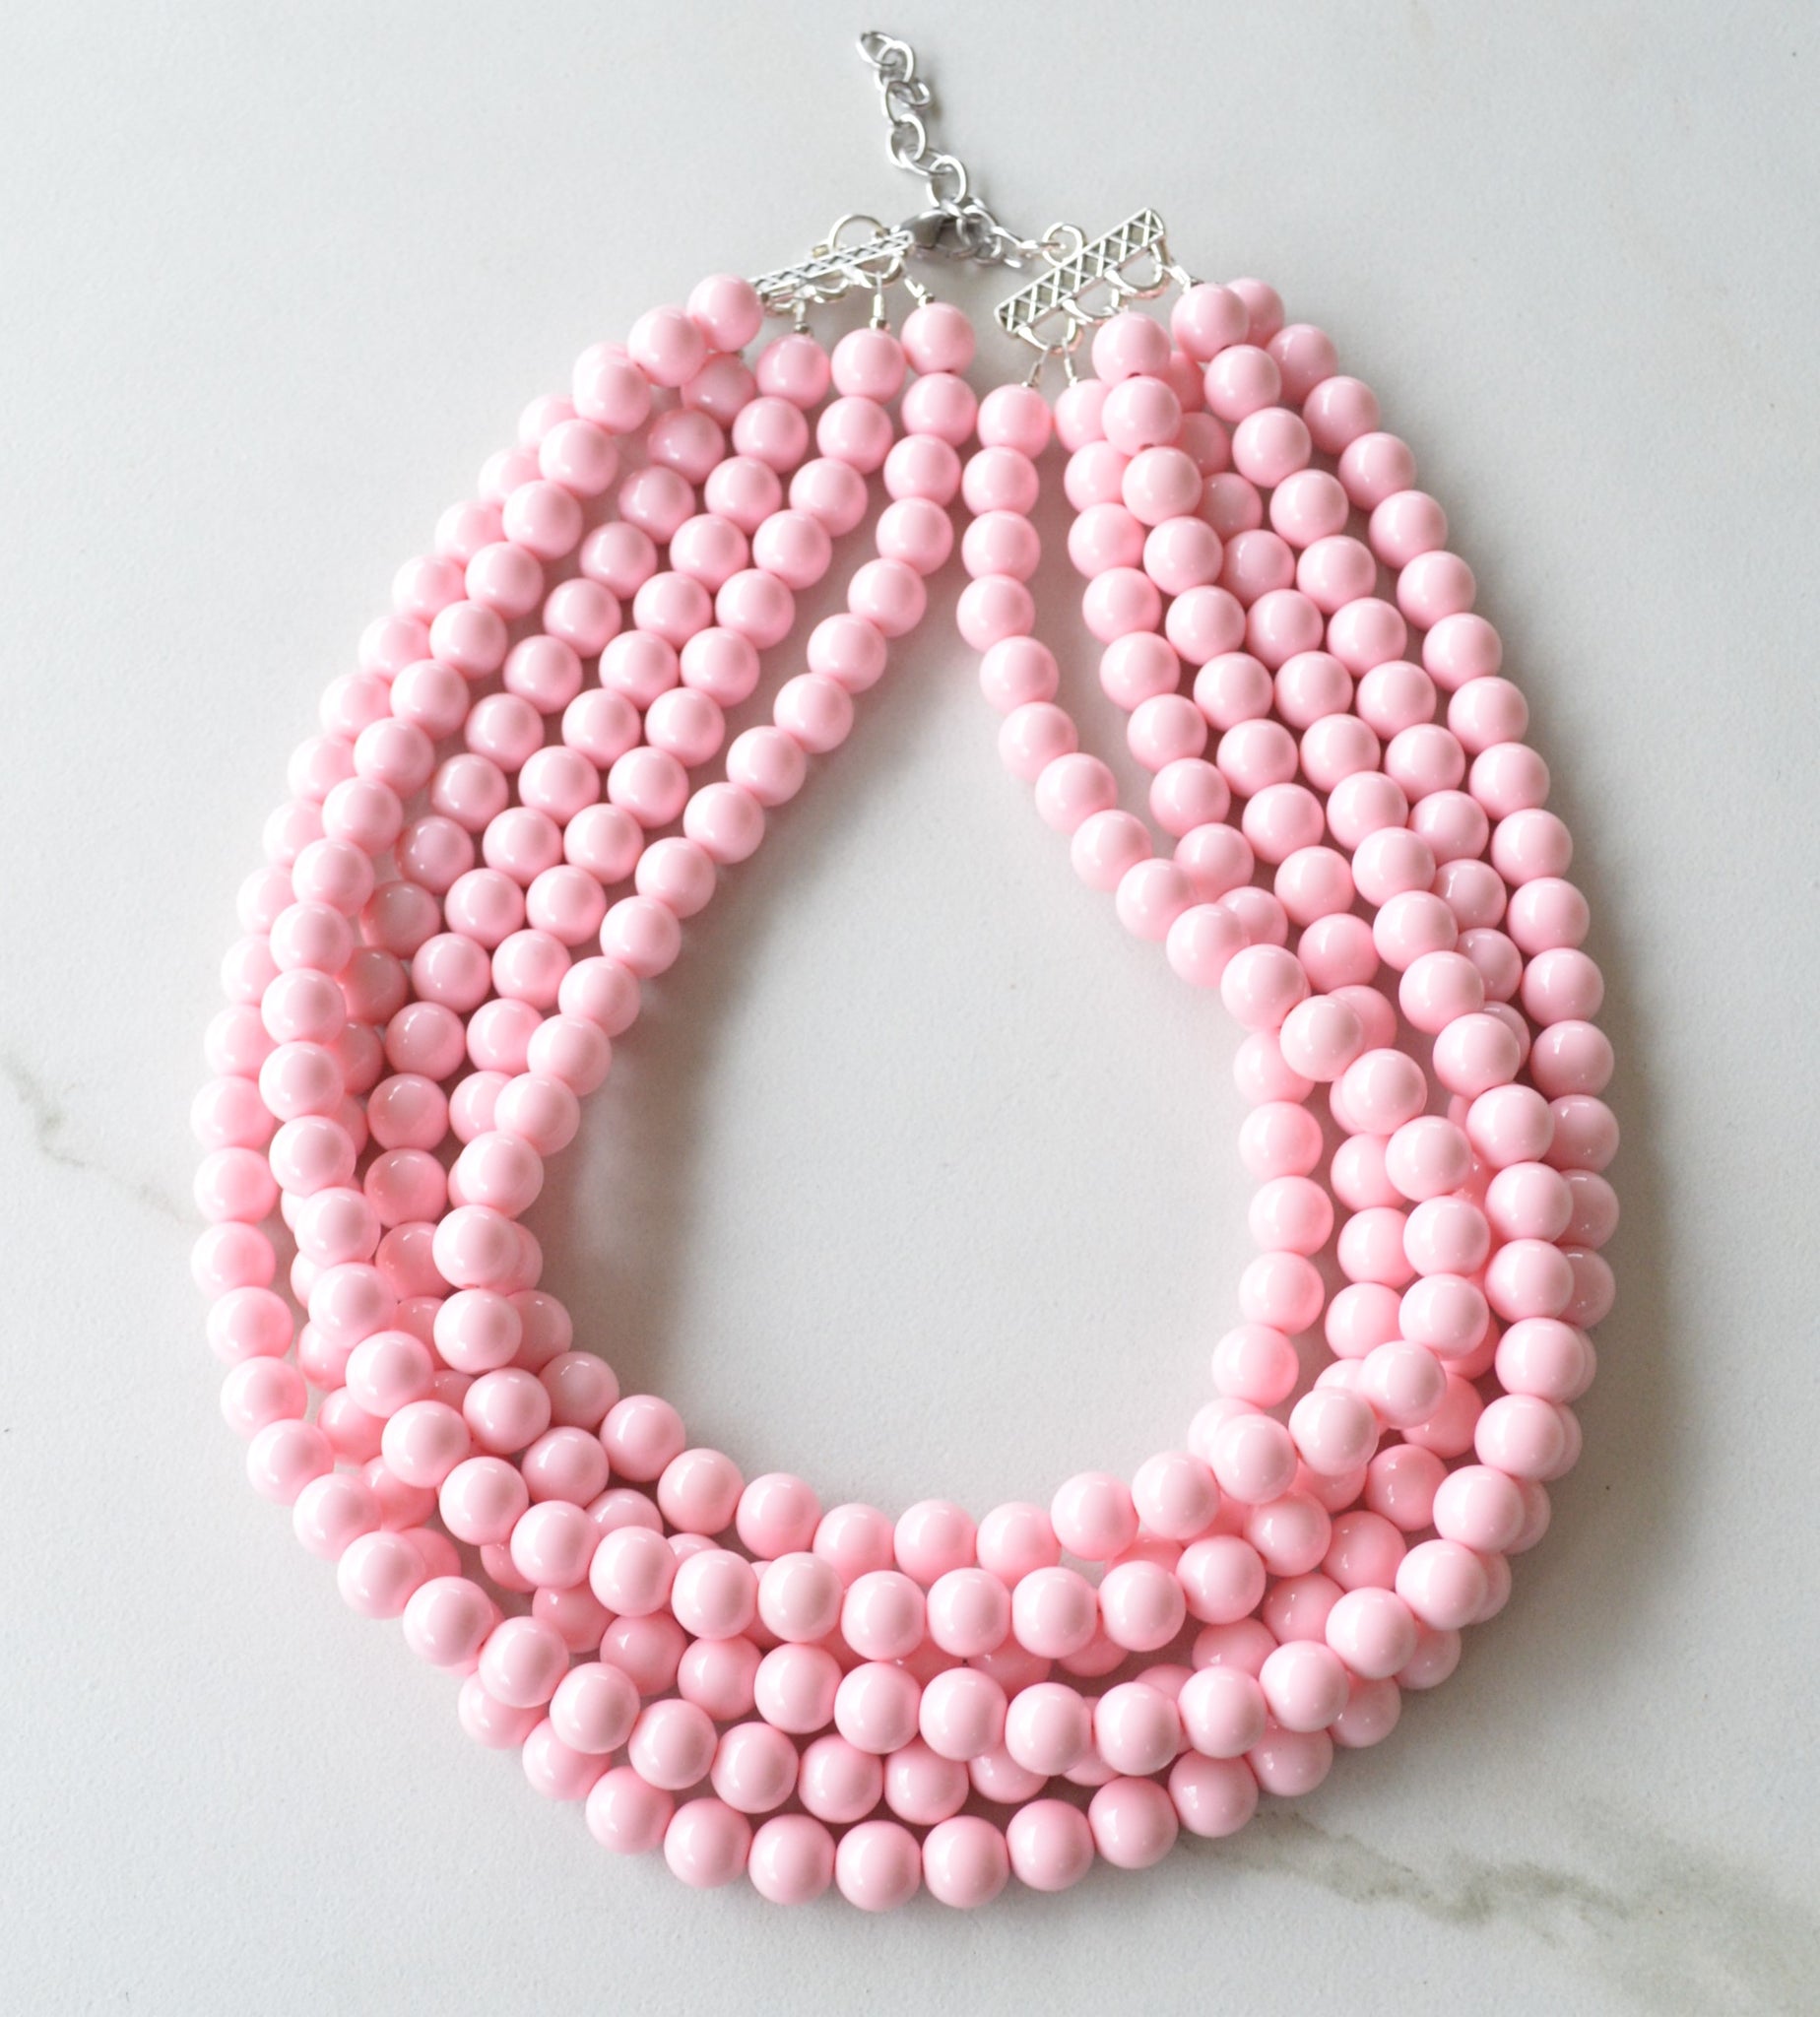 Little Blossom Cut Beads Necklace Bracelet Set Pink Online in India, Buy at  Best Price from Firstcry.com - 13235483